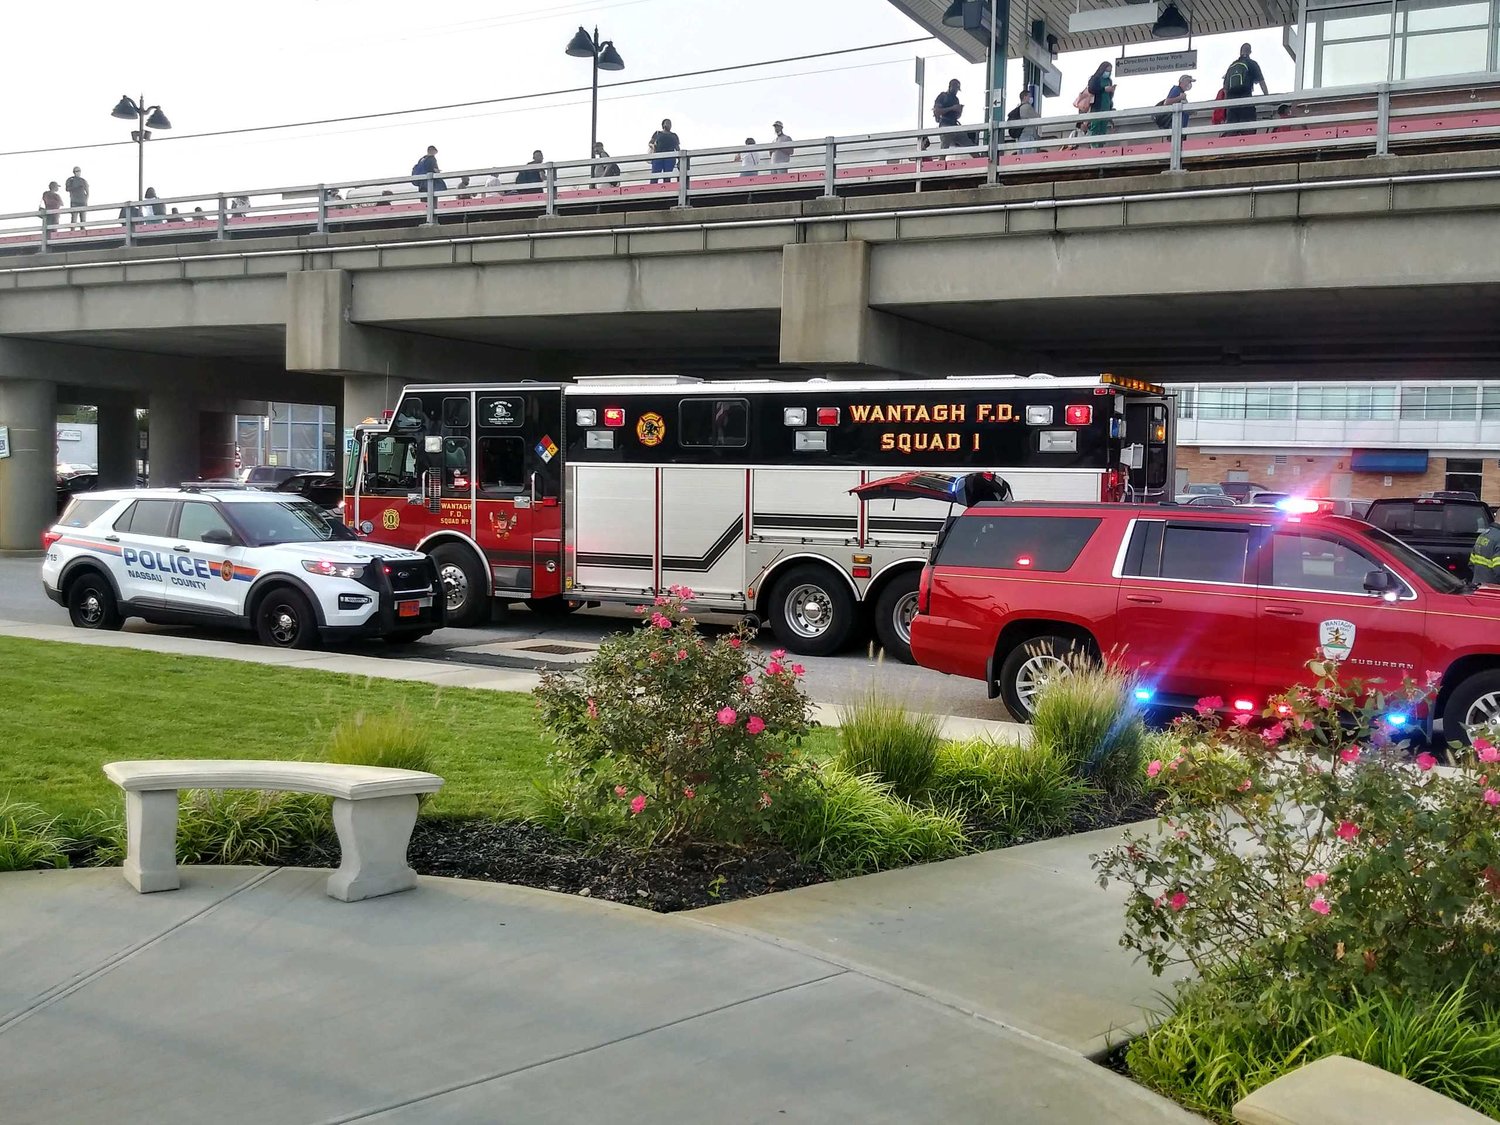 The Wantagh Fire Department and Nassau County Police Department were at the Wantagh Long Island Rail Road station around 5:18 p.m., shortly after the incident took place.